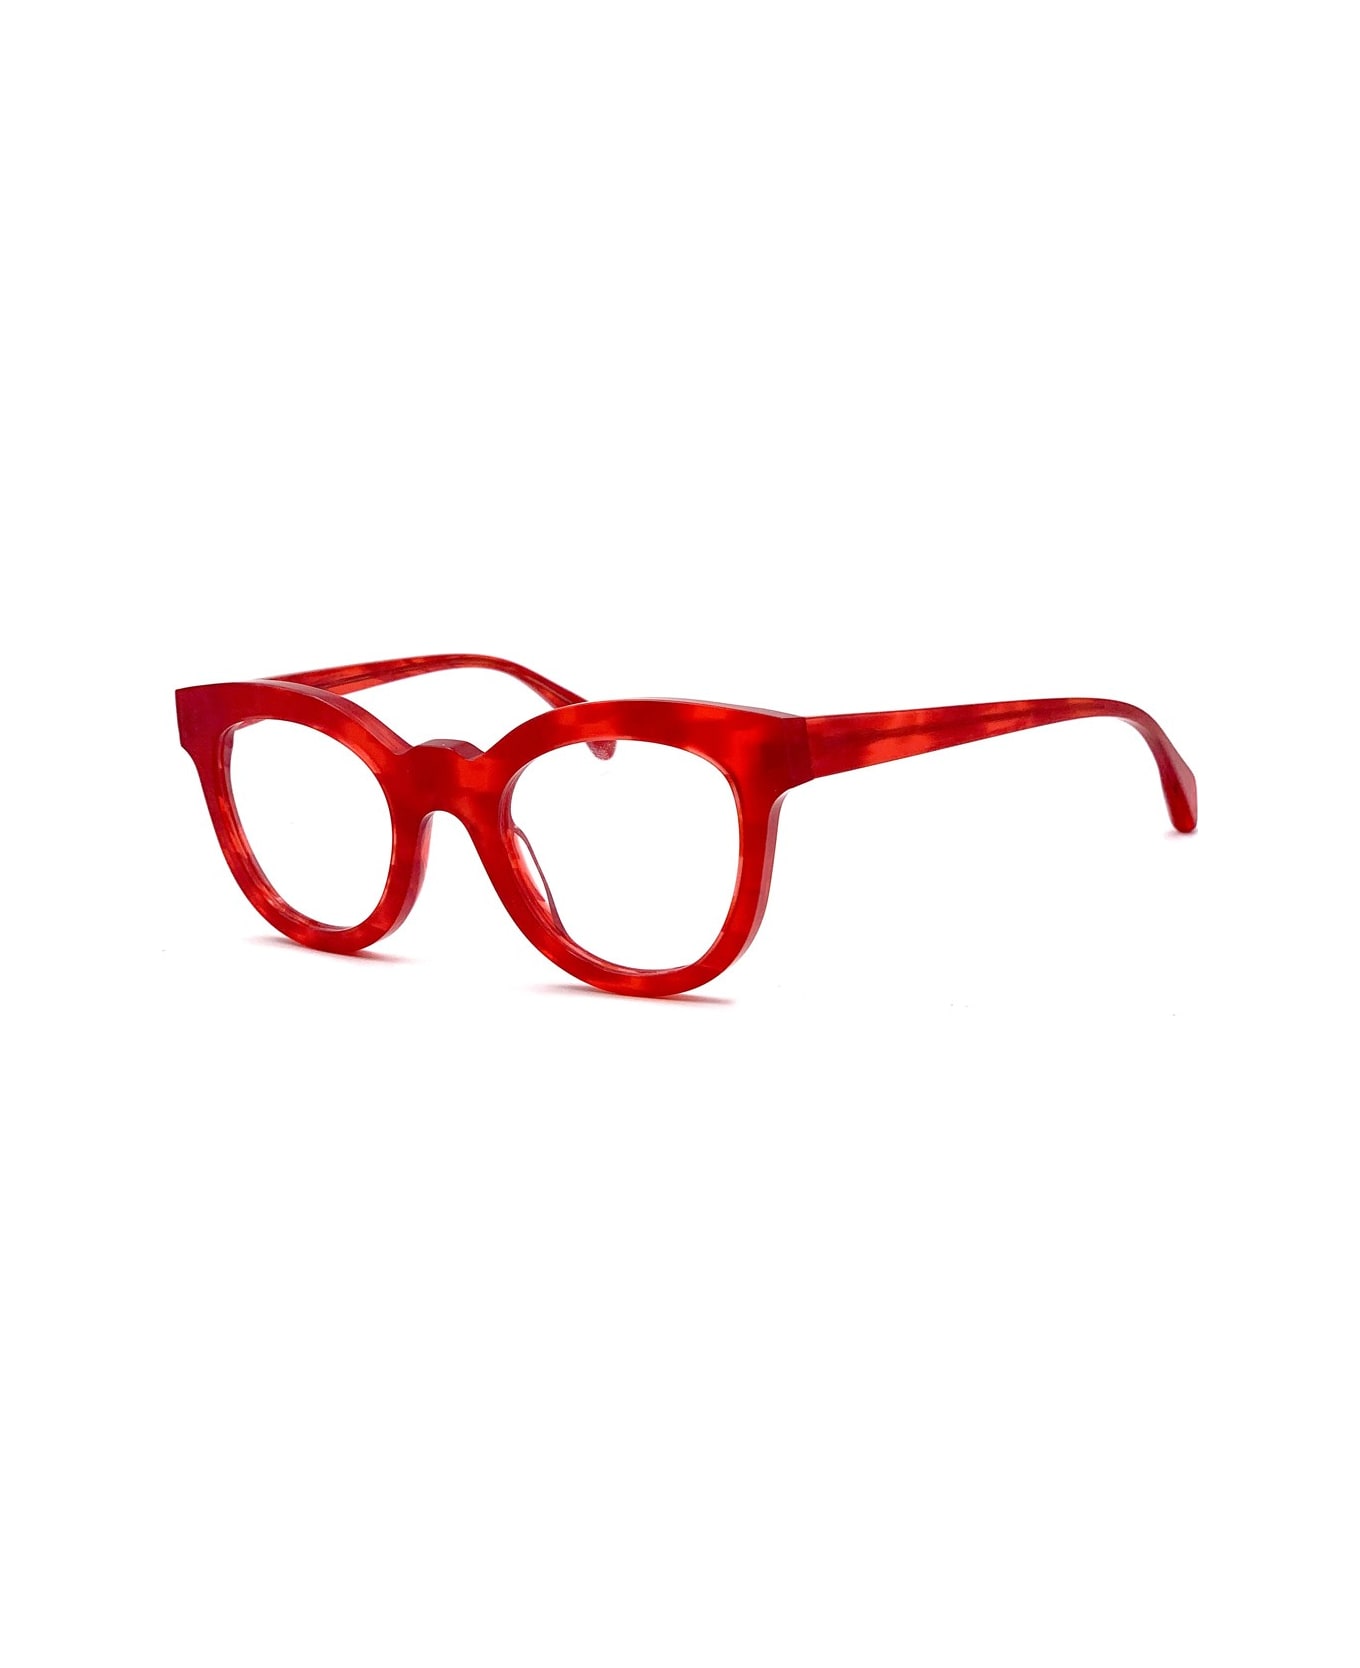 Jacques Durand Re M 218 Glasses - Rosso